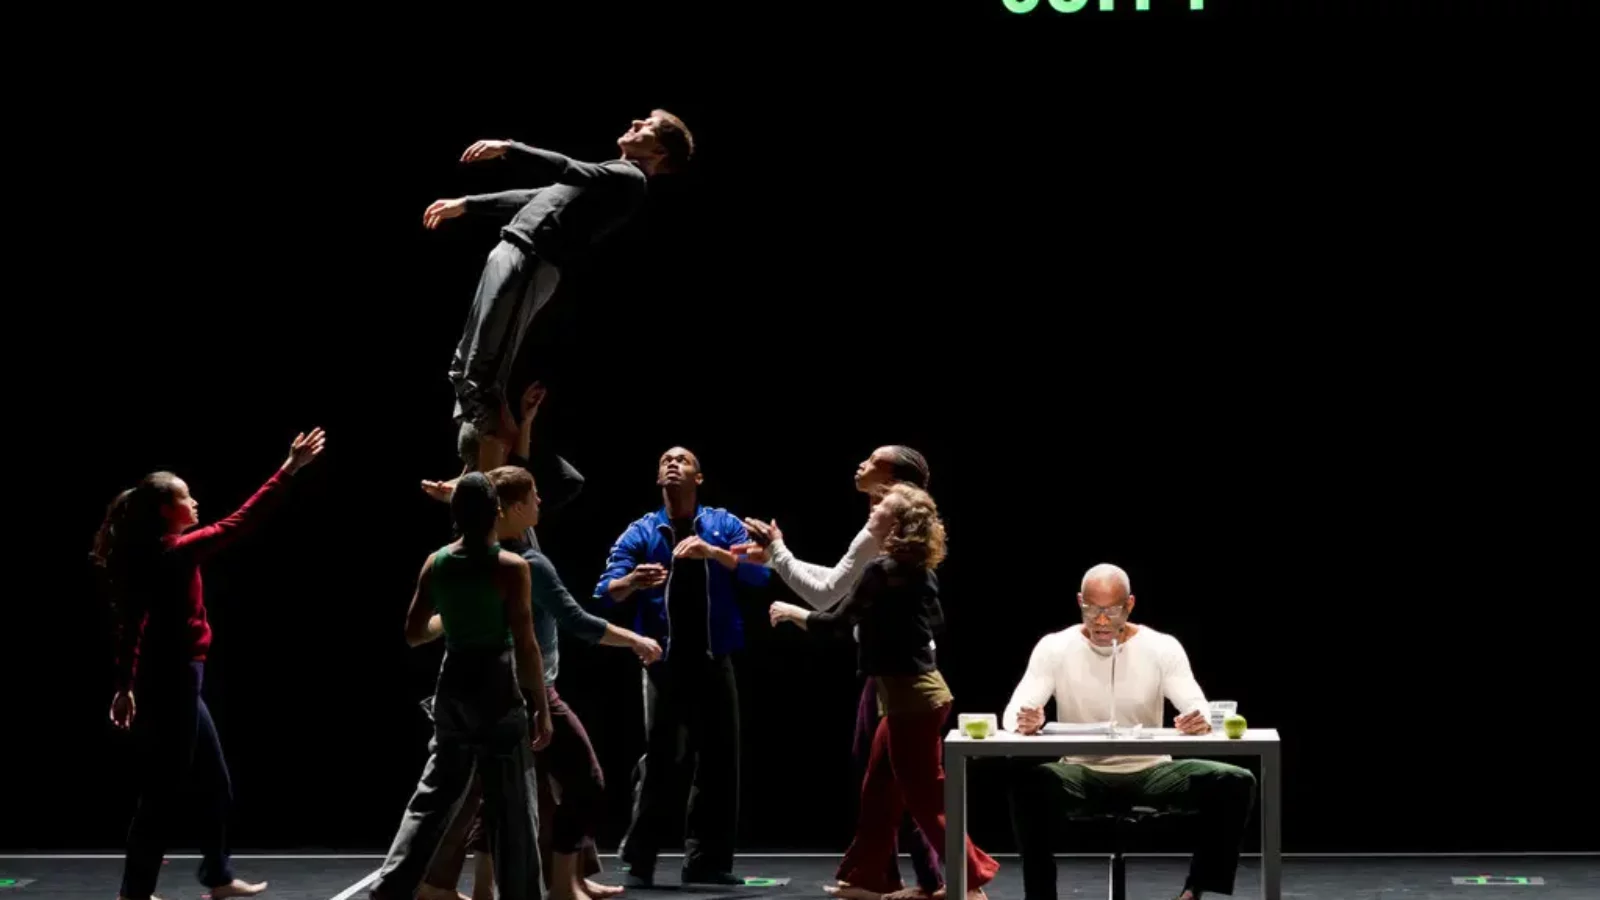 Bill T Jones sits at a desk on stage while dancers perform acrobatic positions behind him